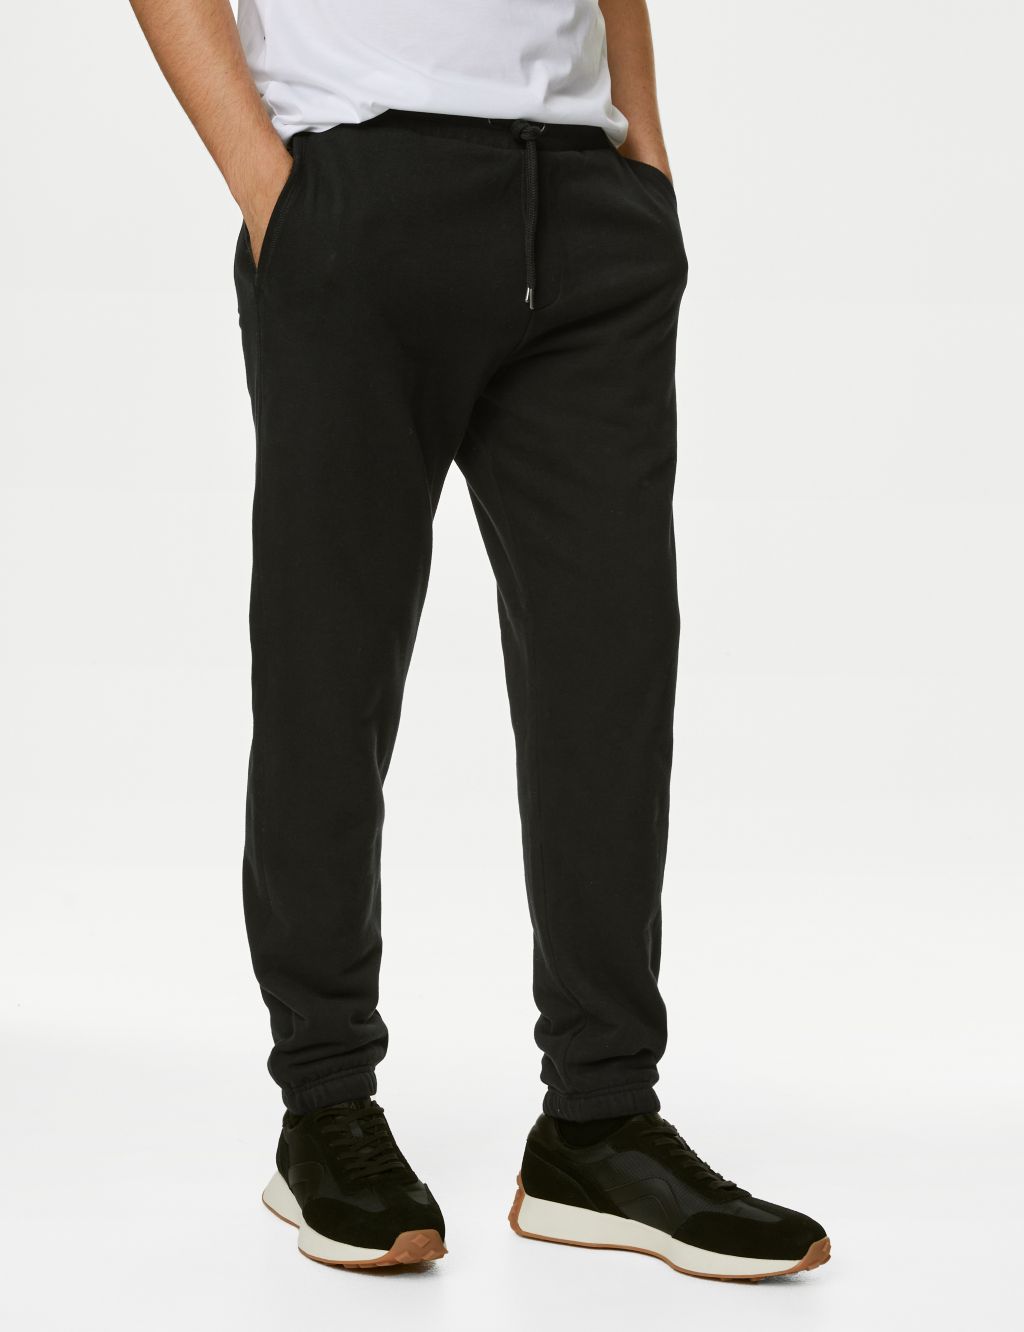 Drawstring Pure Cotton Fleece Lined Joggers image 1